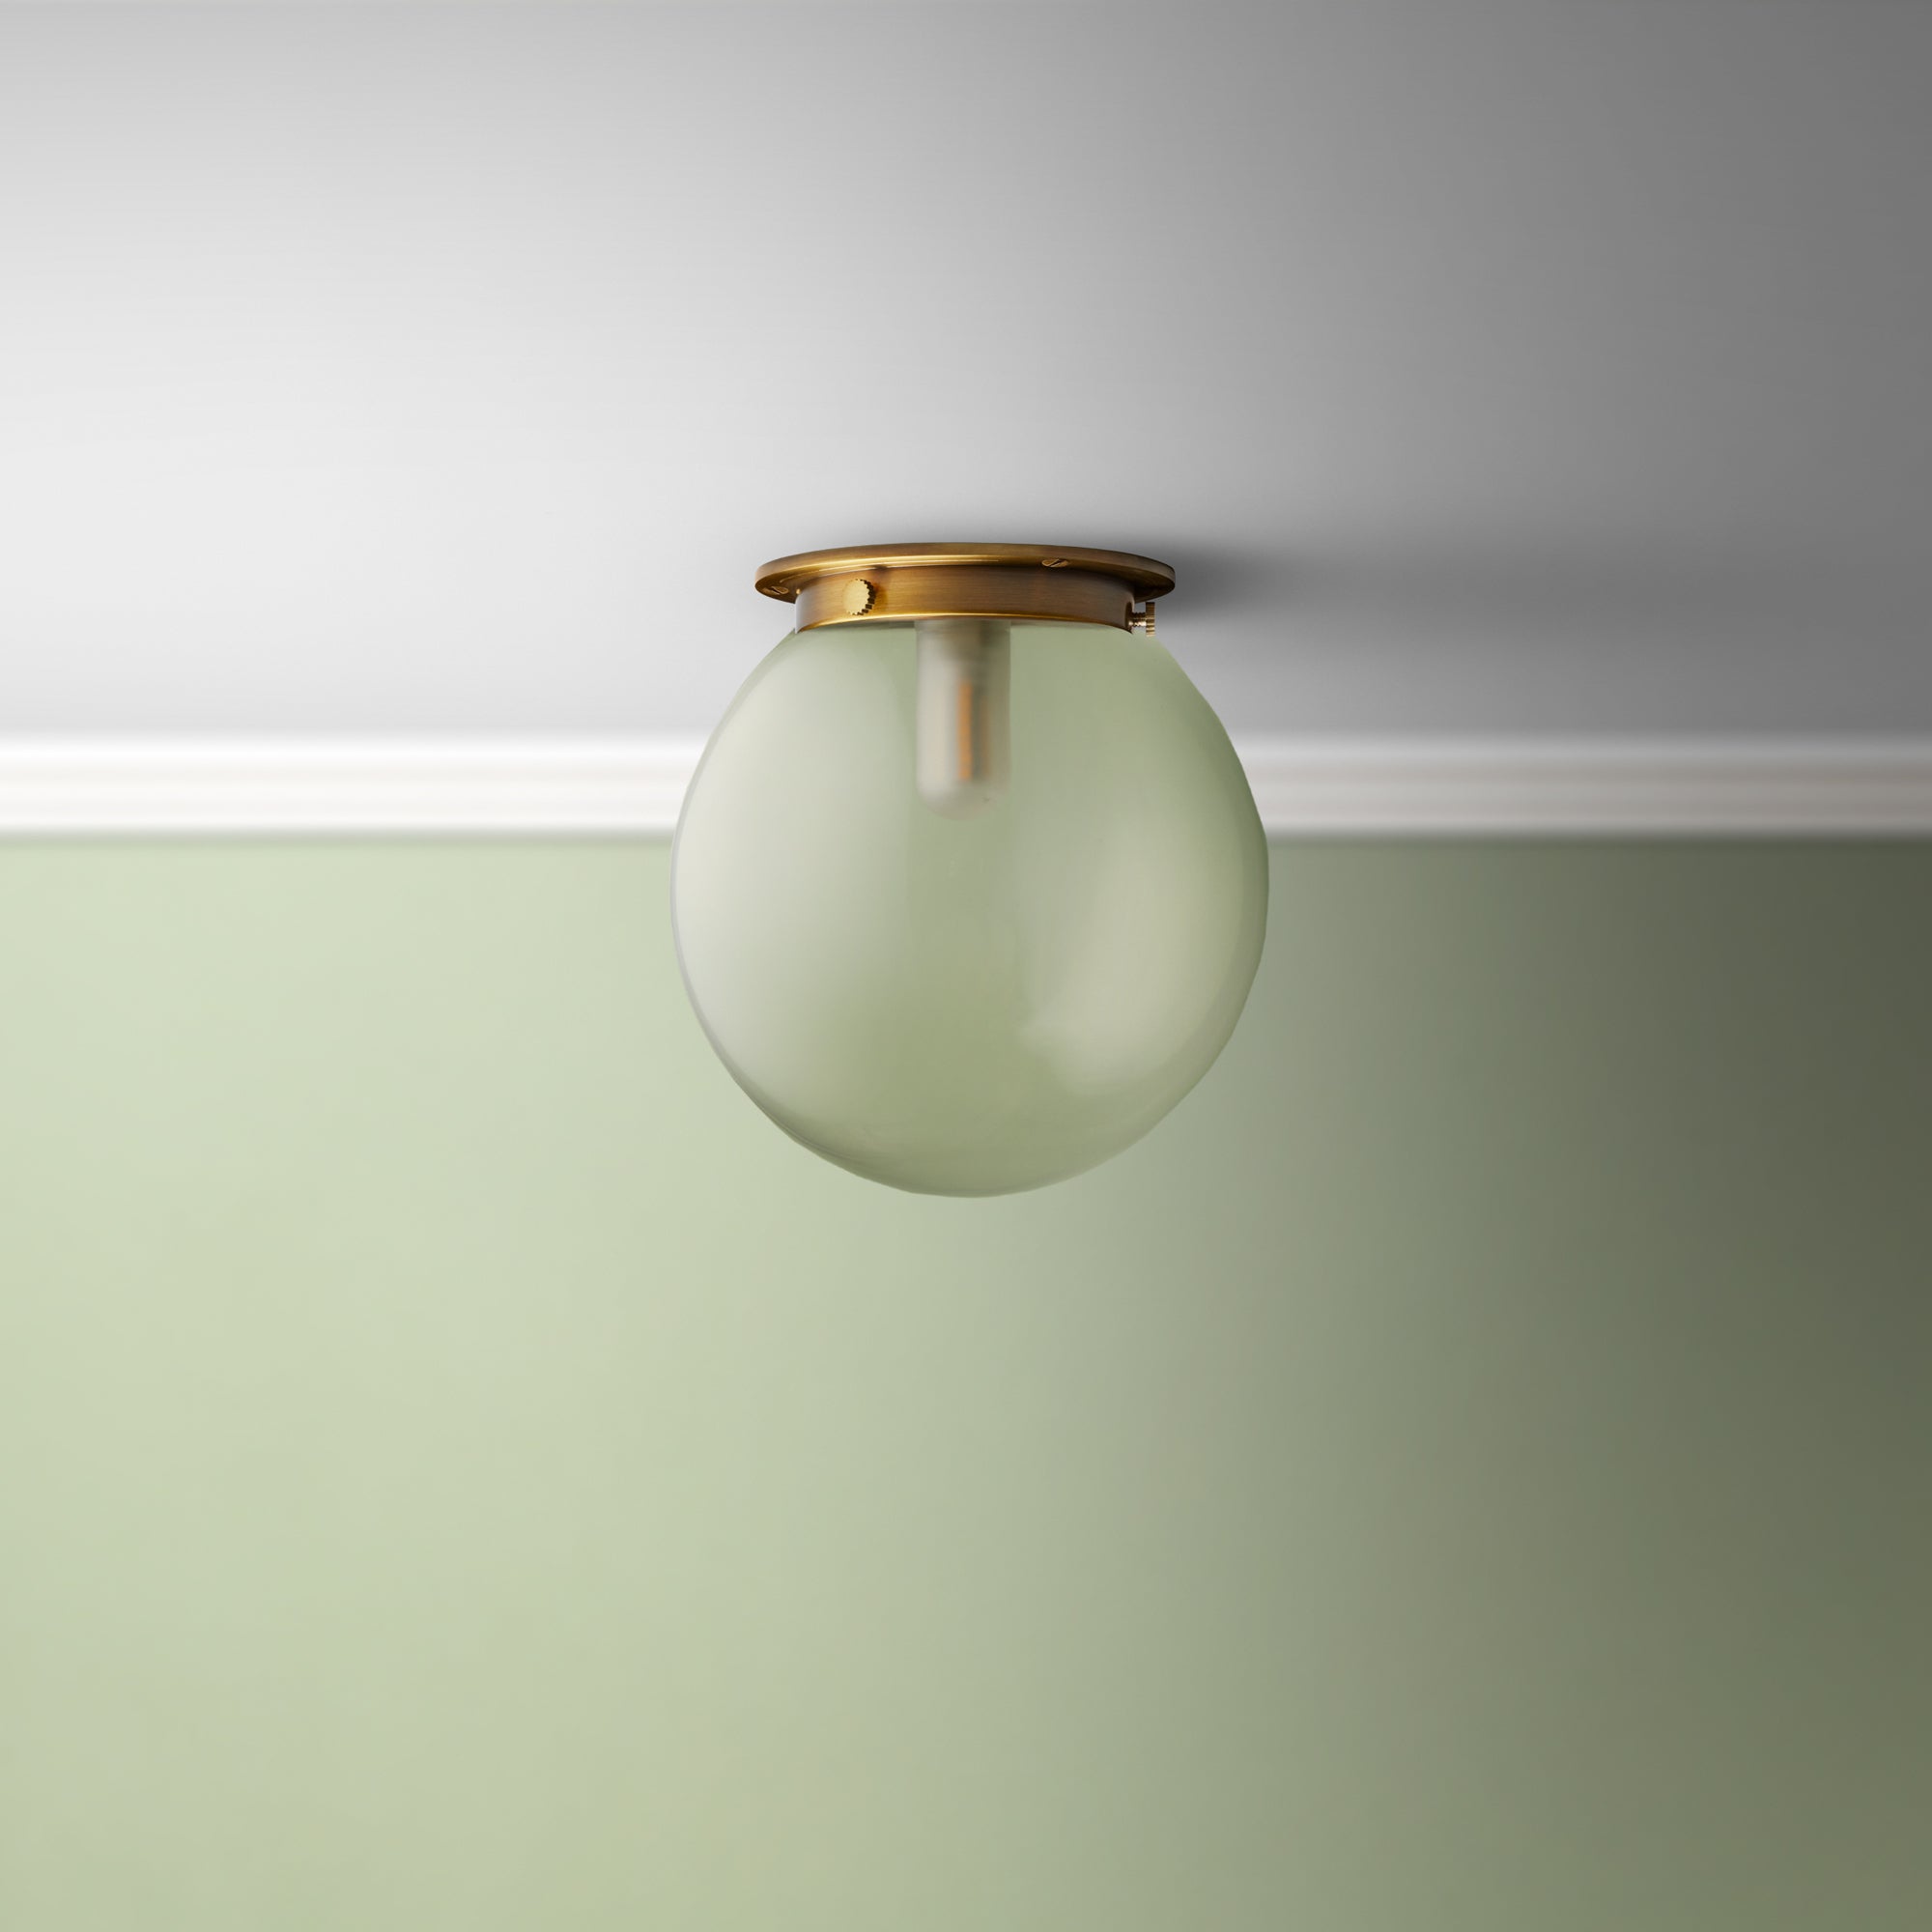 To Pee or Not to Pee?: Holland's Exquisite Bathroom Lighting